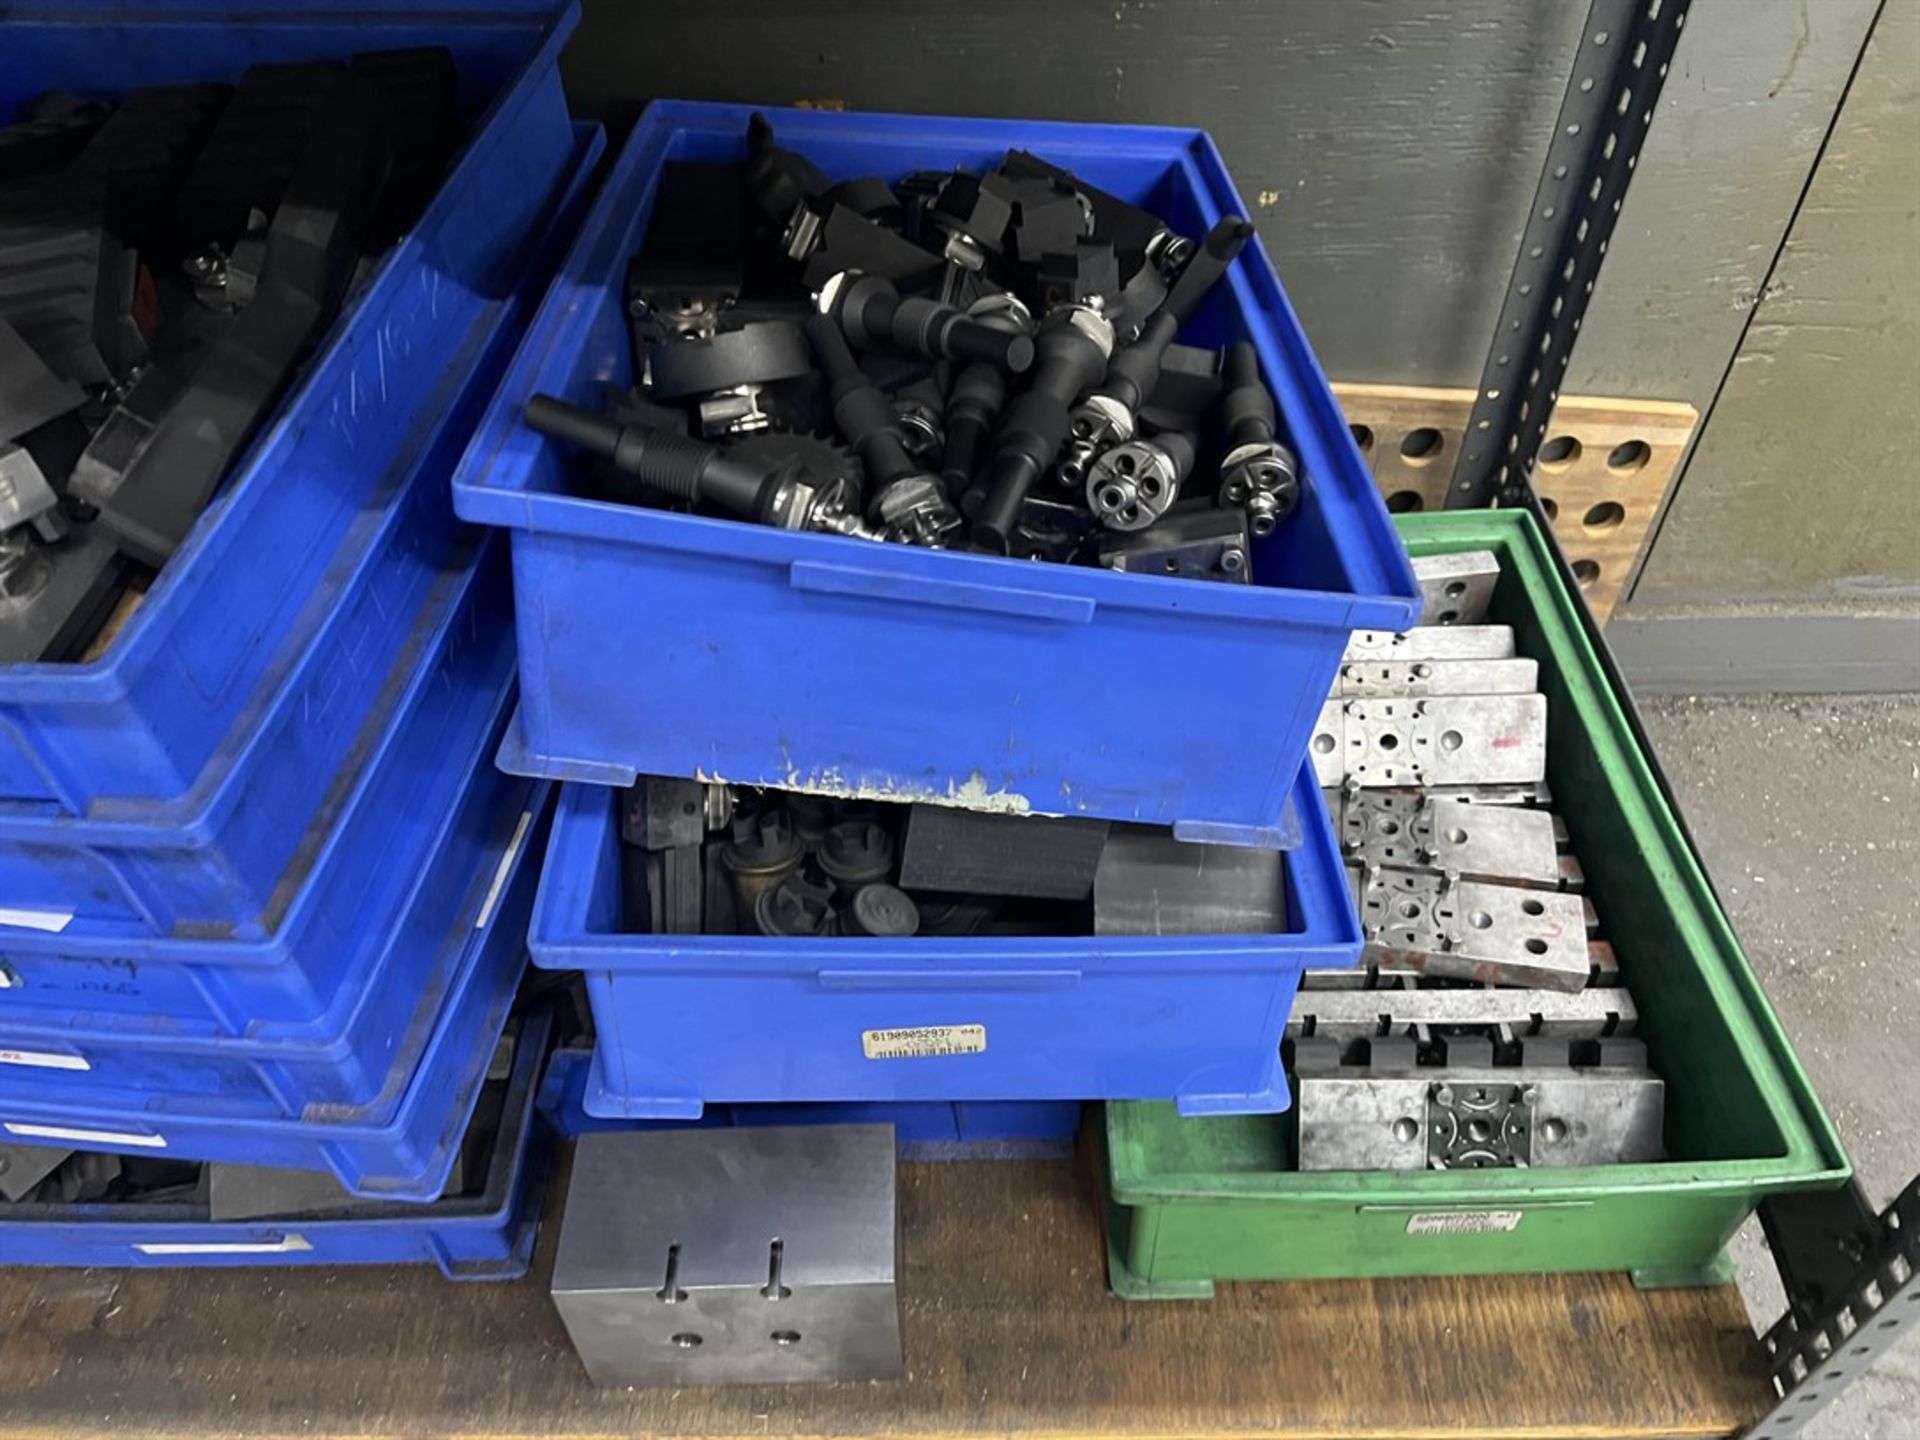 Rack of Assorted EROWA EDM Tooling, Fixtures, and Electrodes - Image 2 of 5